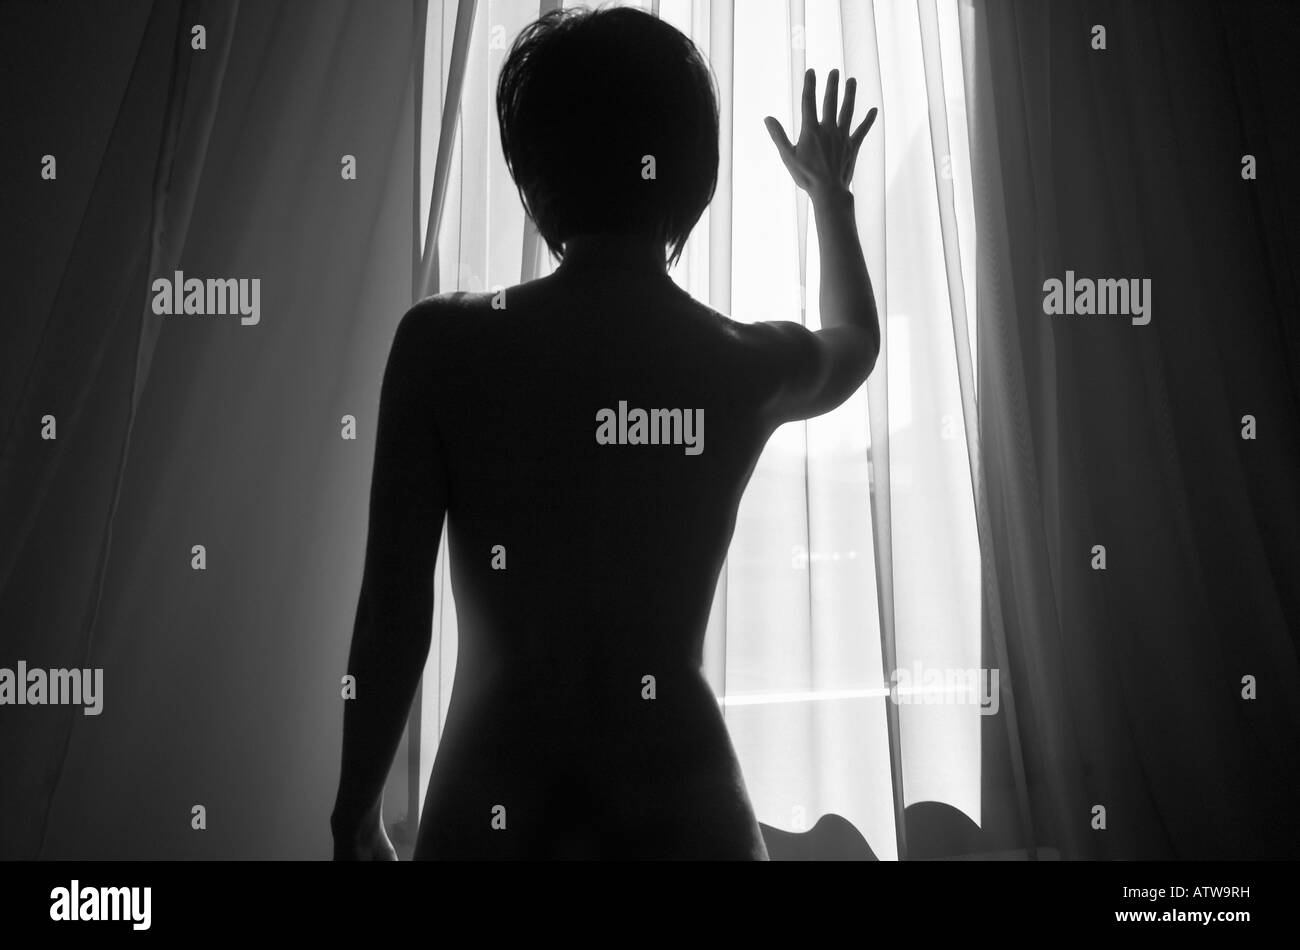 Woman silhouetted against window light placing hand on window Stock Photo